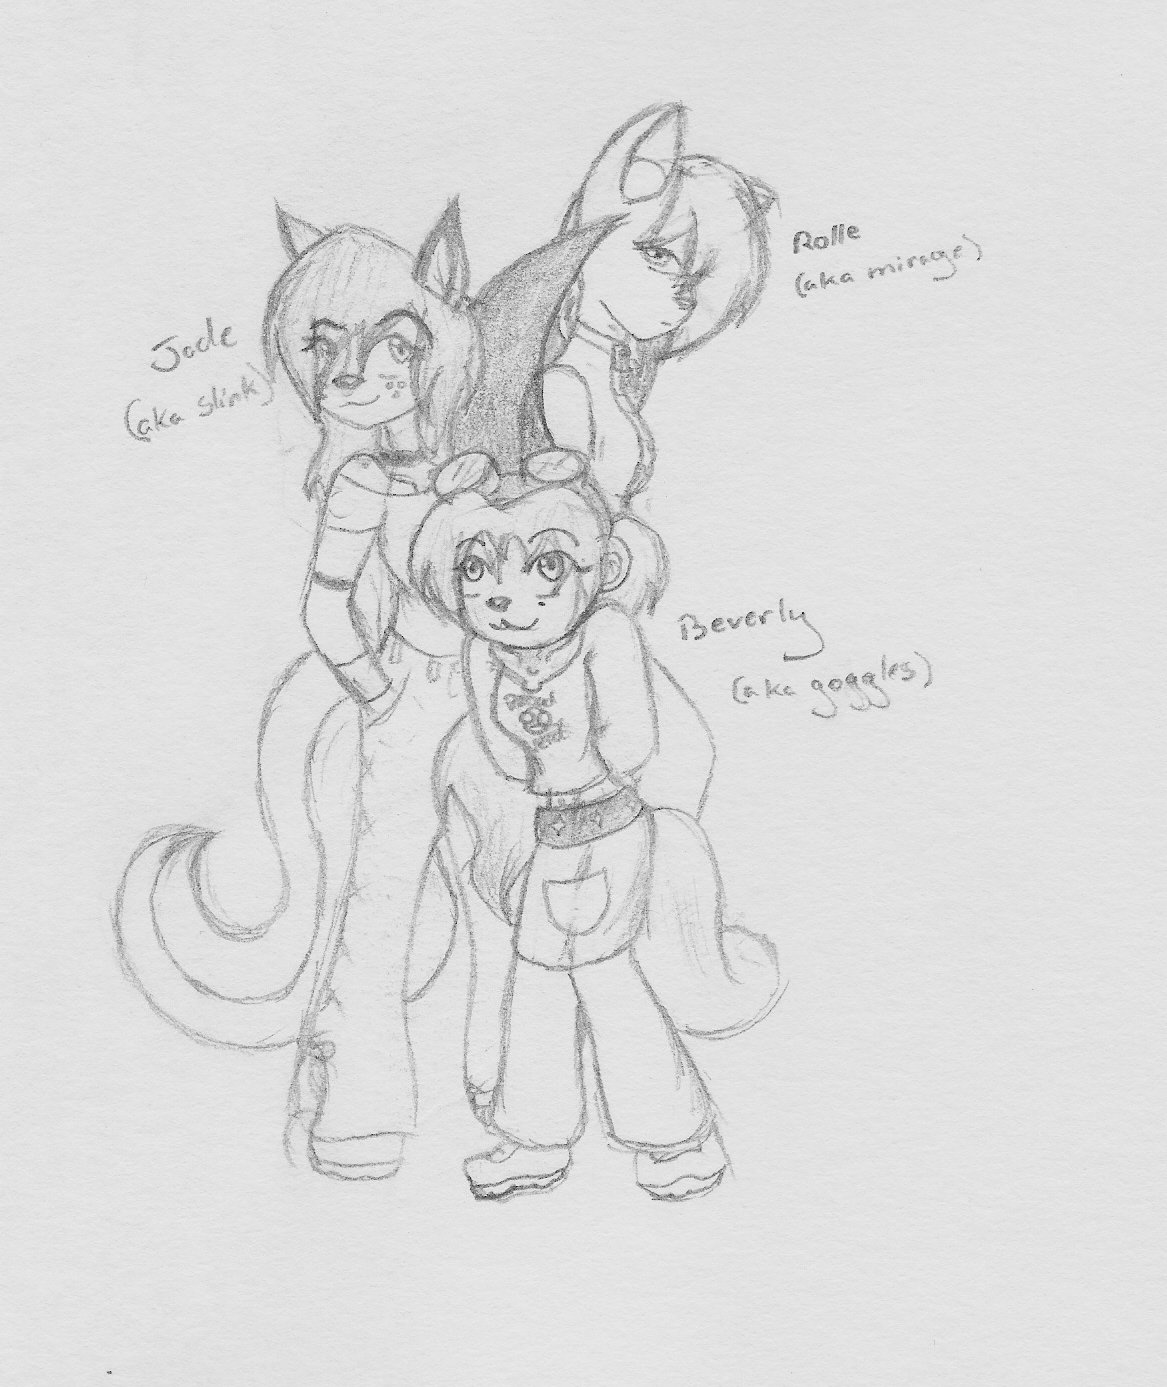 The Gang by White_fox_of_jade